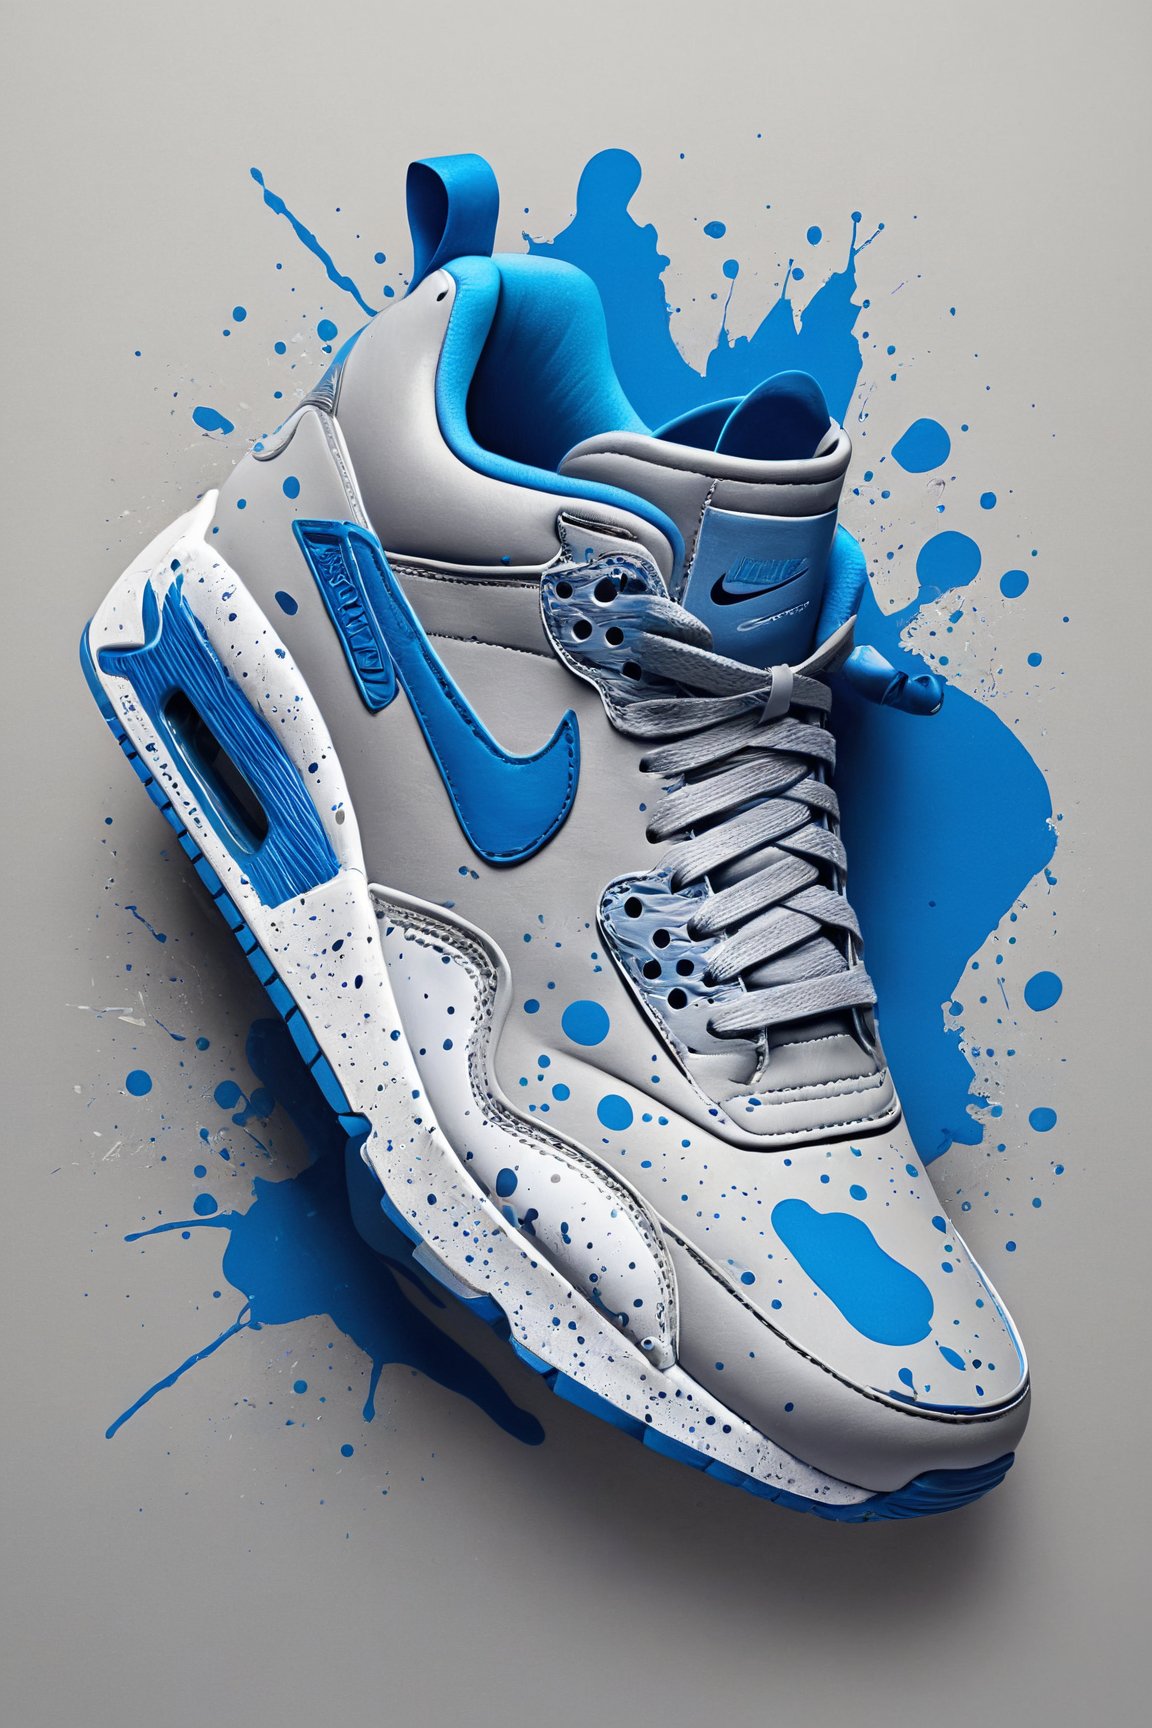 (best quality,8K,highres,masterpiece), ultra-detailed studio photography showcasing a sleek sneakers design against a simple grey background. The image features sneakers with a blue theme, accentuated by subtle paint splatter details, adding a touch of vibrancy and personality to the design. The minimalist background allows the sneakers to take center stage, highlighting their craftsmanship and style. This artwork captures the essence of modern sneaker culture, presenting a visually striking composition that is both refined and contemporary.